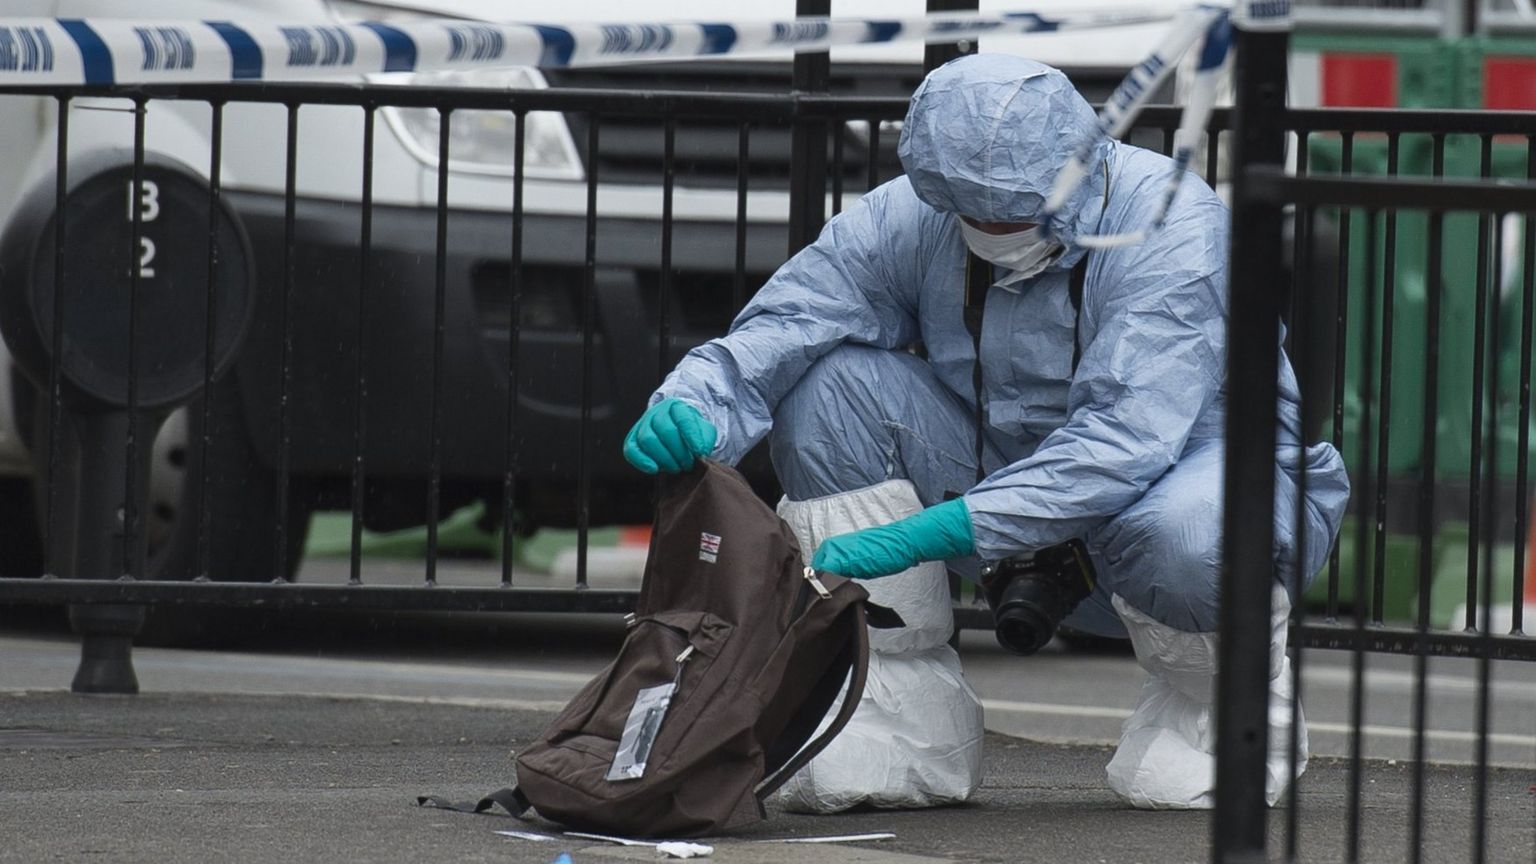 A forensics officer examining a rucksack